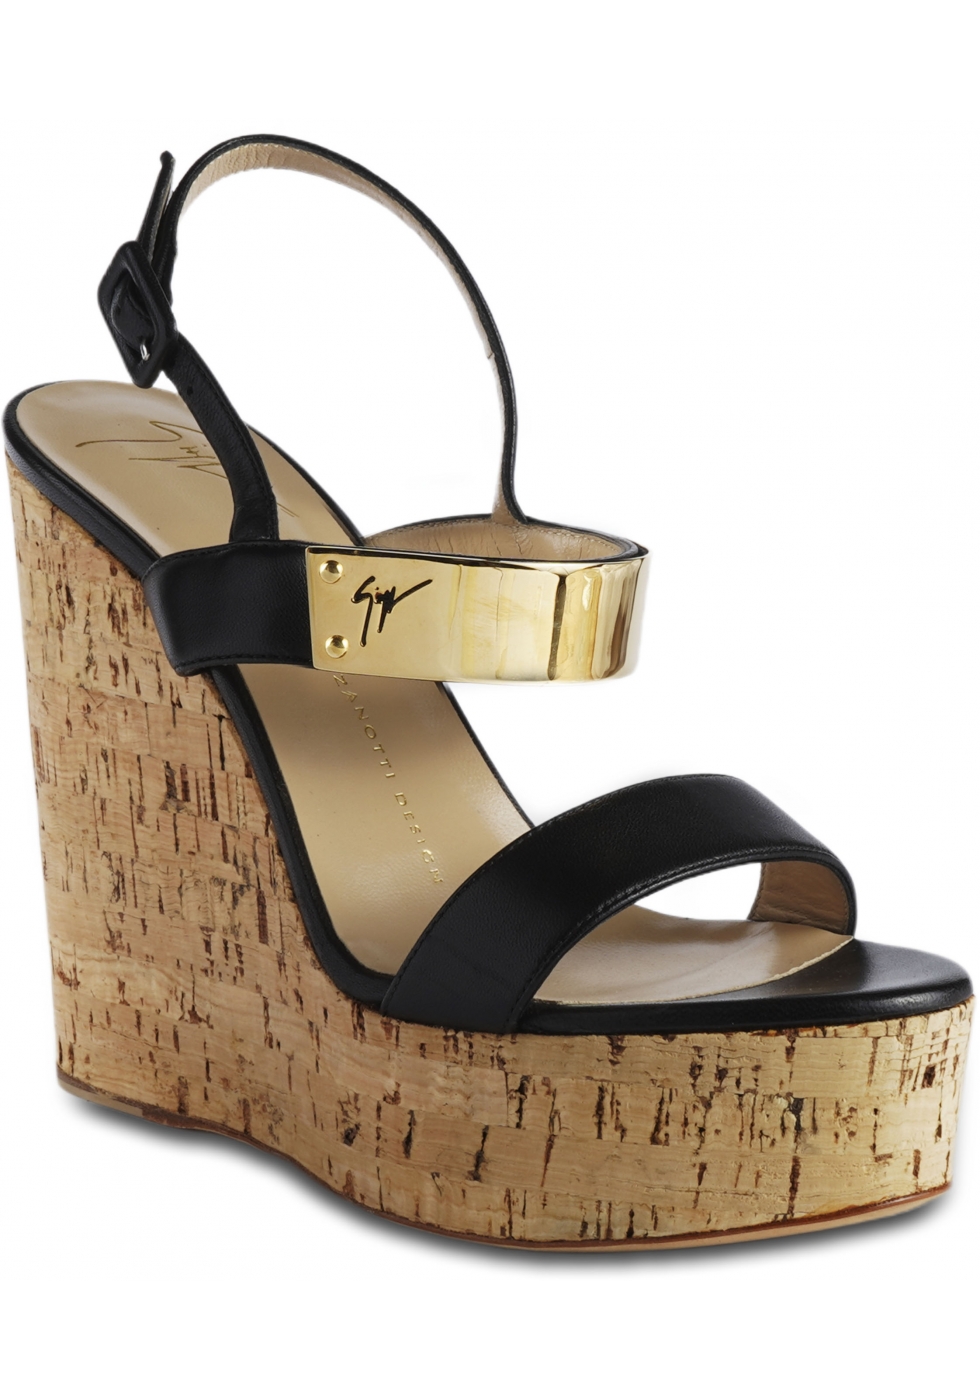 Giuseppe high wedge in matte black leather with buckle closure - Italian Boutique